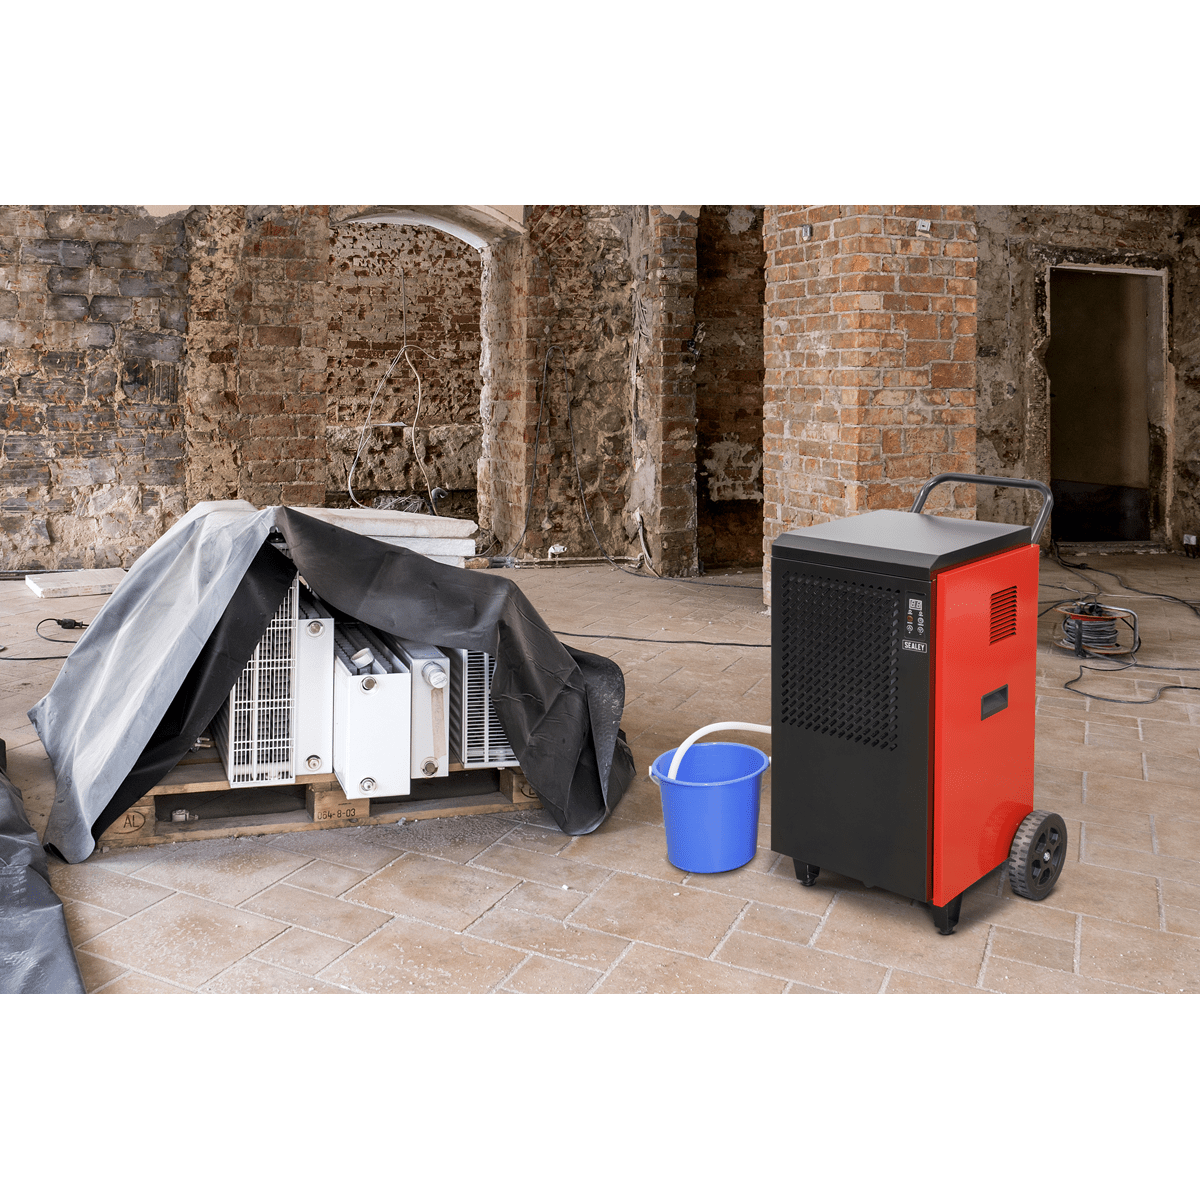 Industrial Dehumidifier 70L | Powerful dehumidification capacity, extracts up to 70 litres of water per day. | toolforce.ie